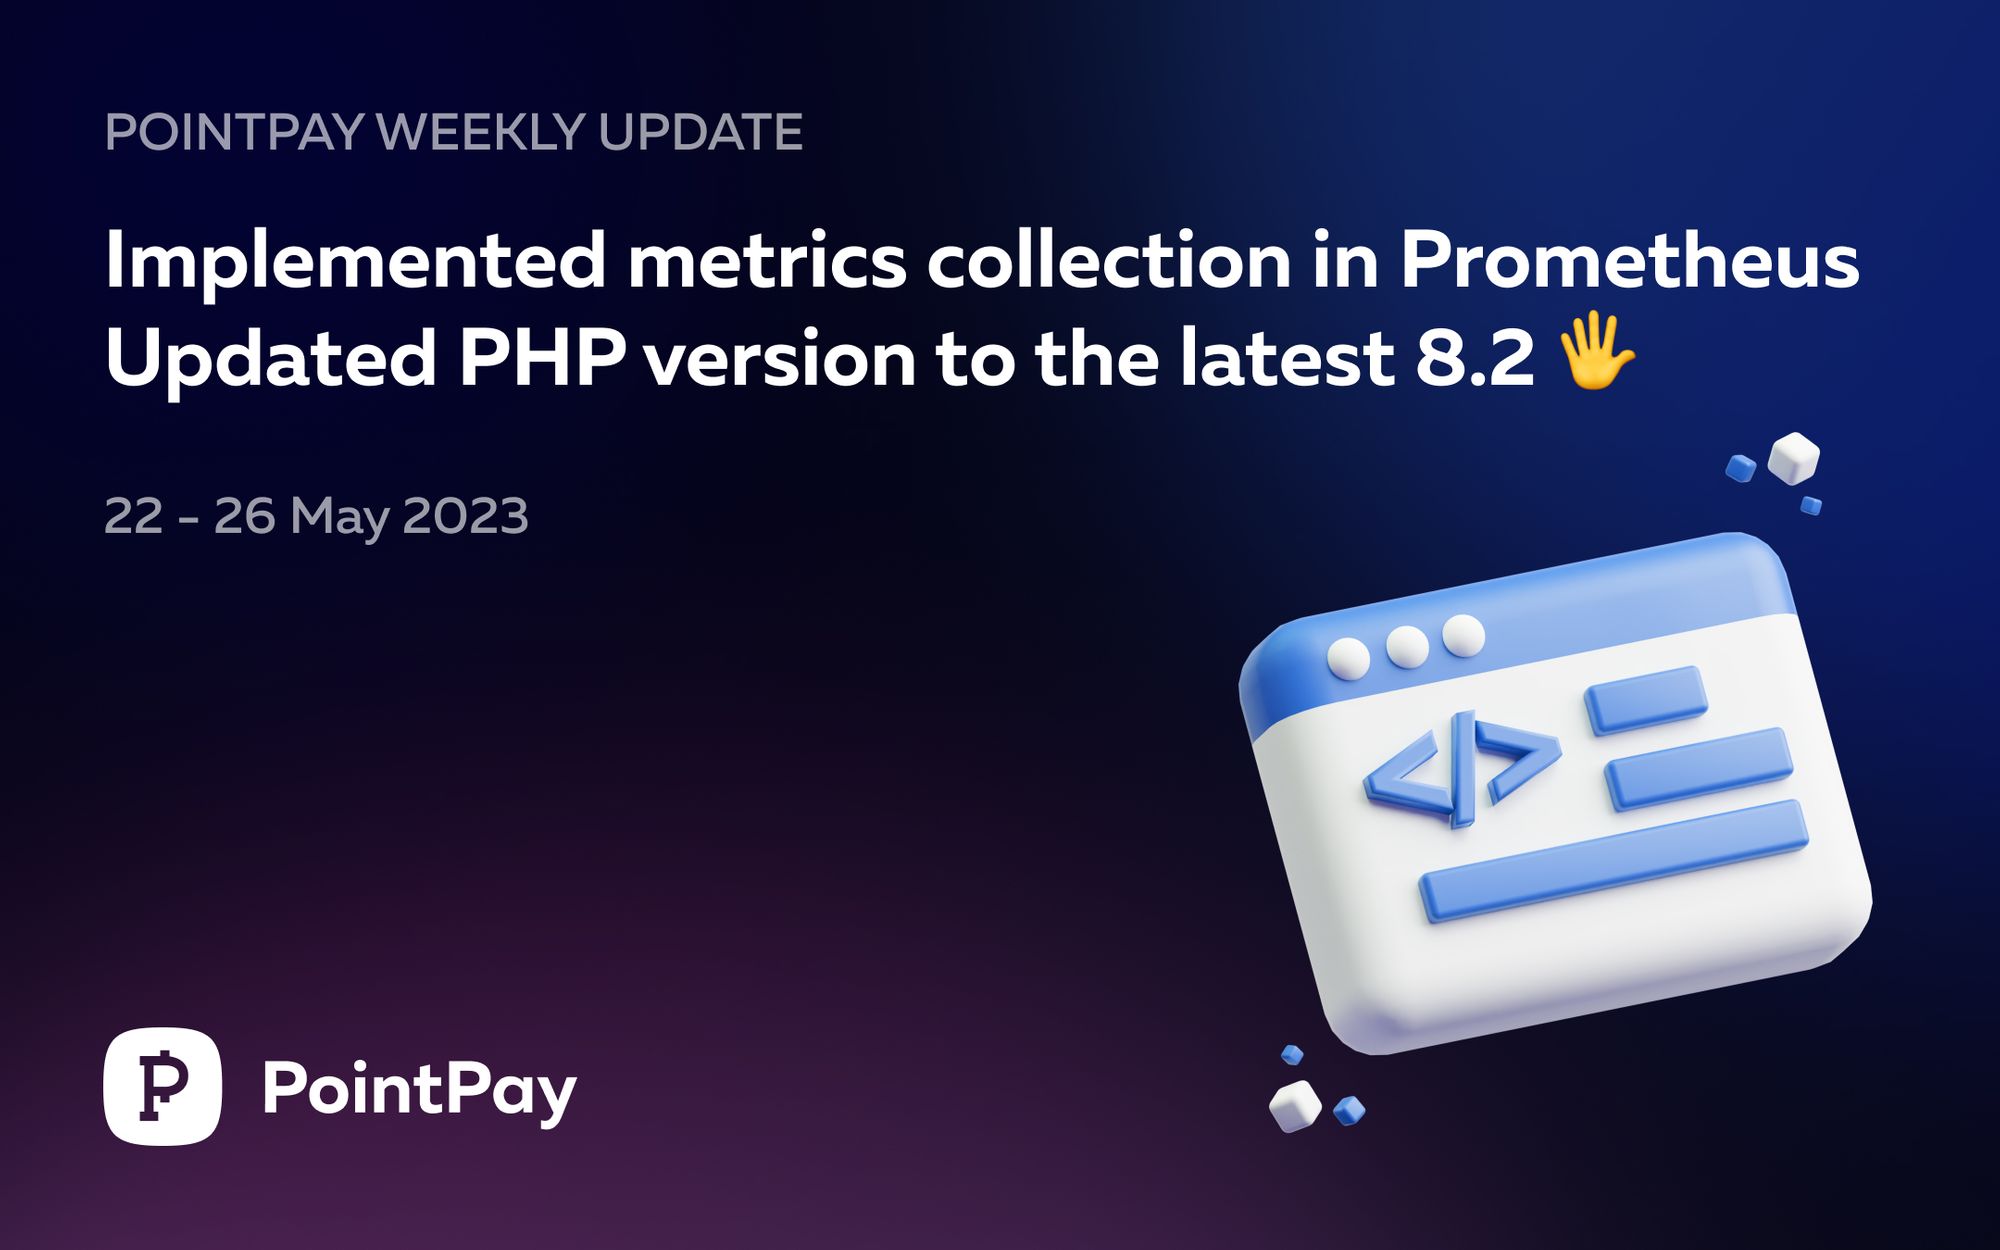 PointPay Weekly Update (22 - 26 May 2023)